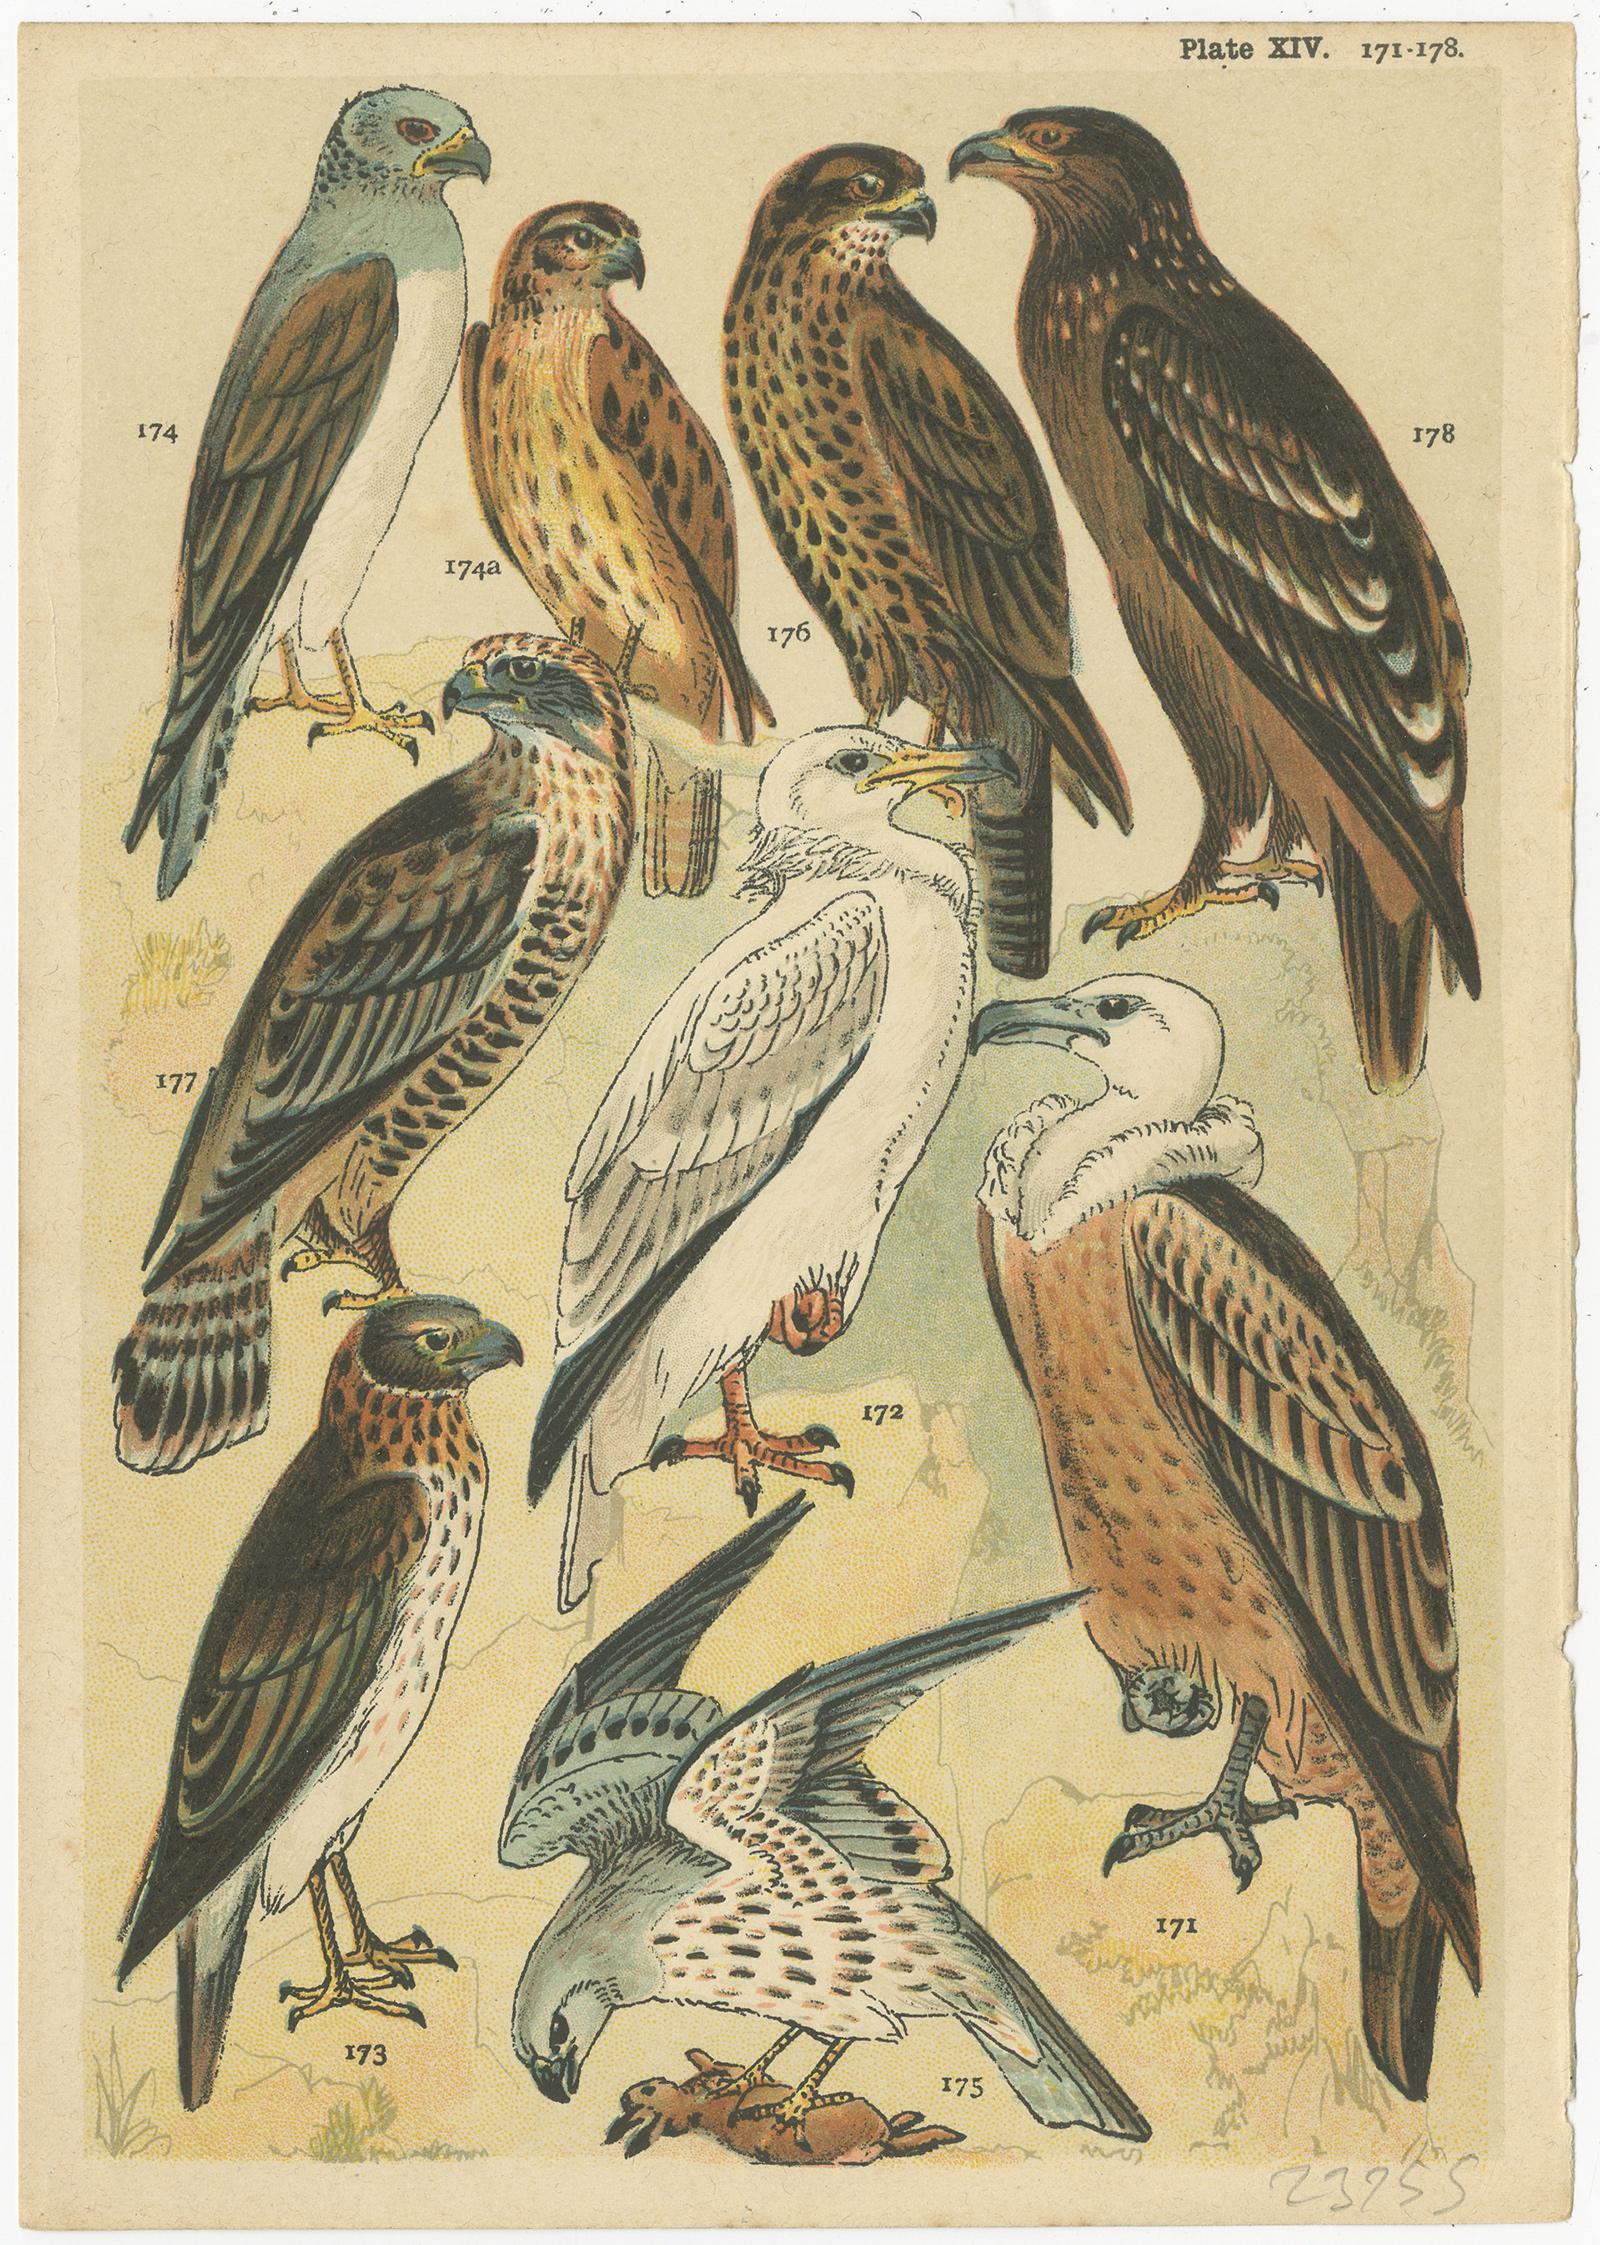 Set of 3 antique prints depicting various birds of prey. These prints originate from the series 'Our Country's' by W. J. Gordon, published circa 1900.